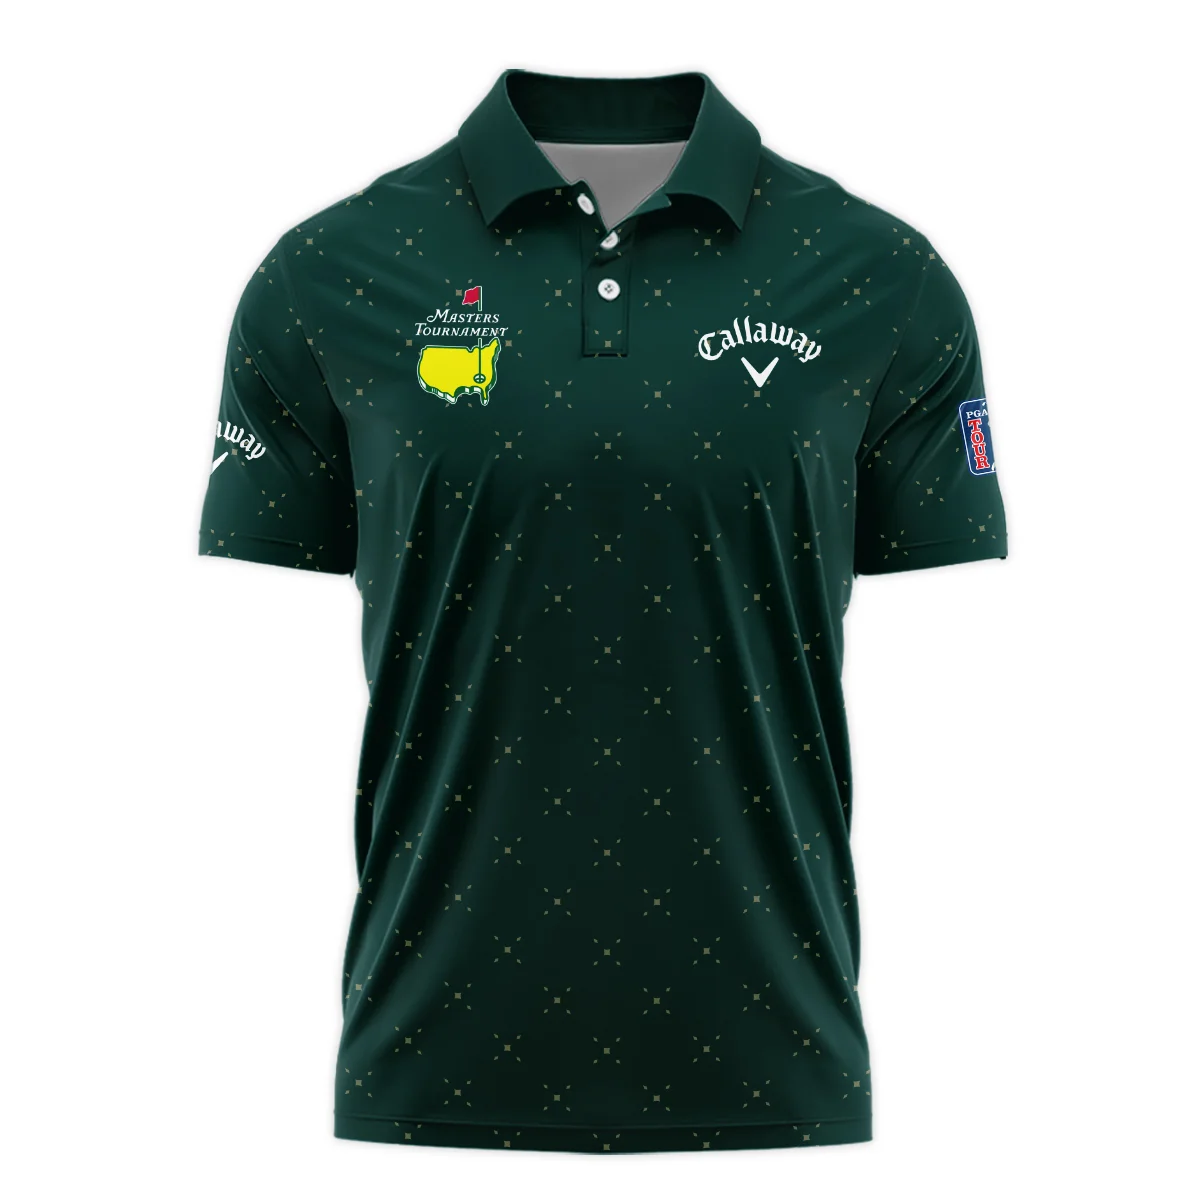 Diamond Shapes With Geometric Pattern Masters Tournament Callaway Vneck Polo Shirt Style Classic Polo Shirt For Men